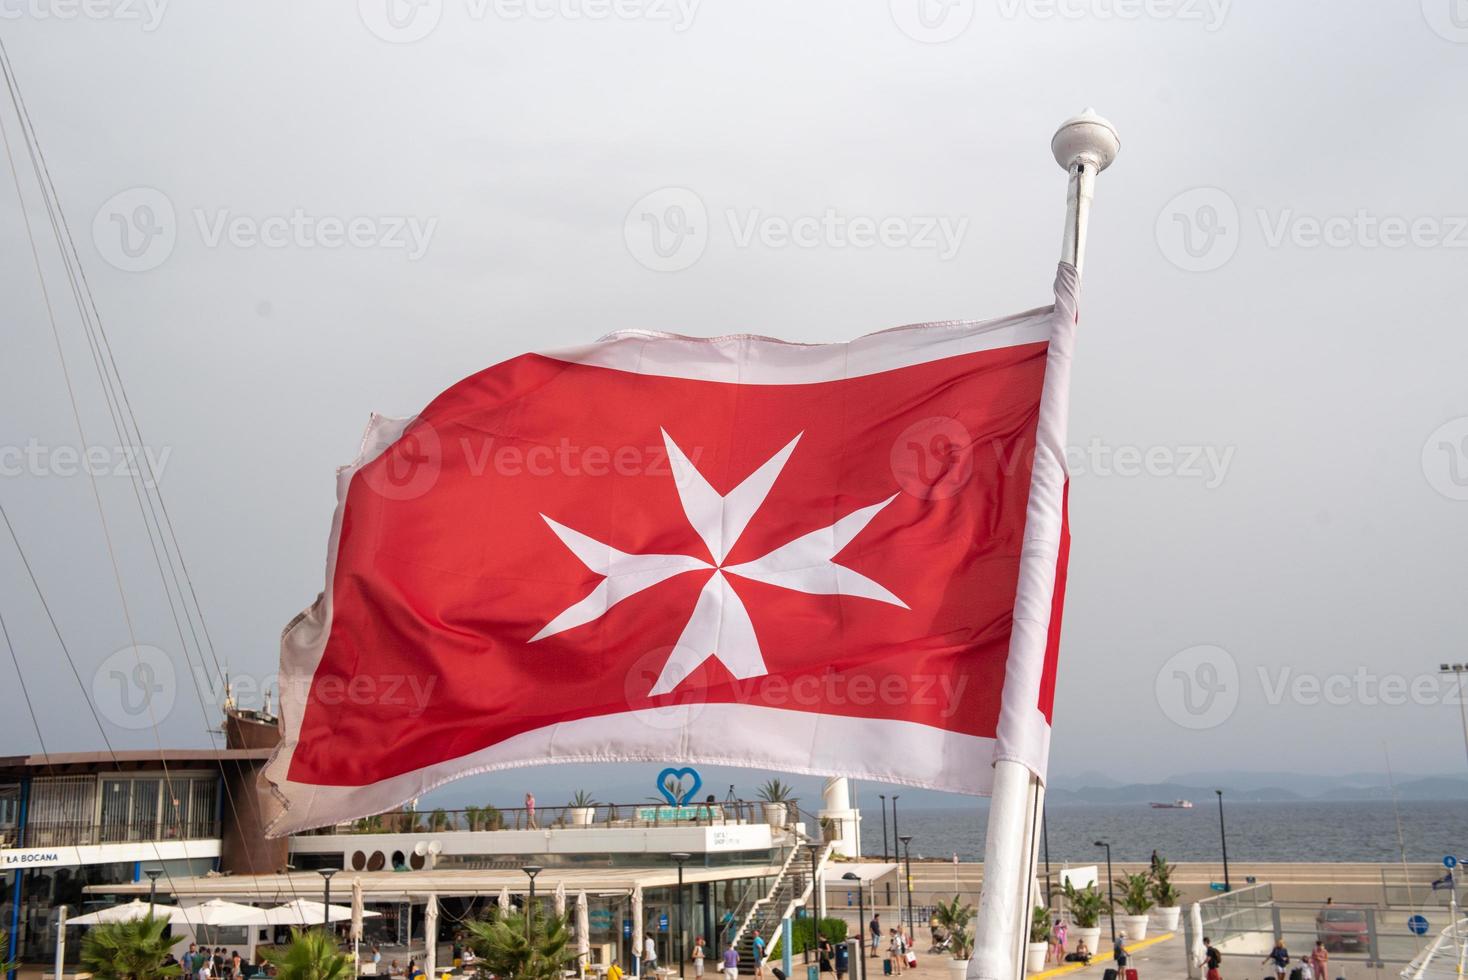 Maltese flag on a luxury boat anchored in the marina of Greece. Old Maltese flag, white cross on red background waving at stern of yacht. Blue sky background. photo